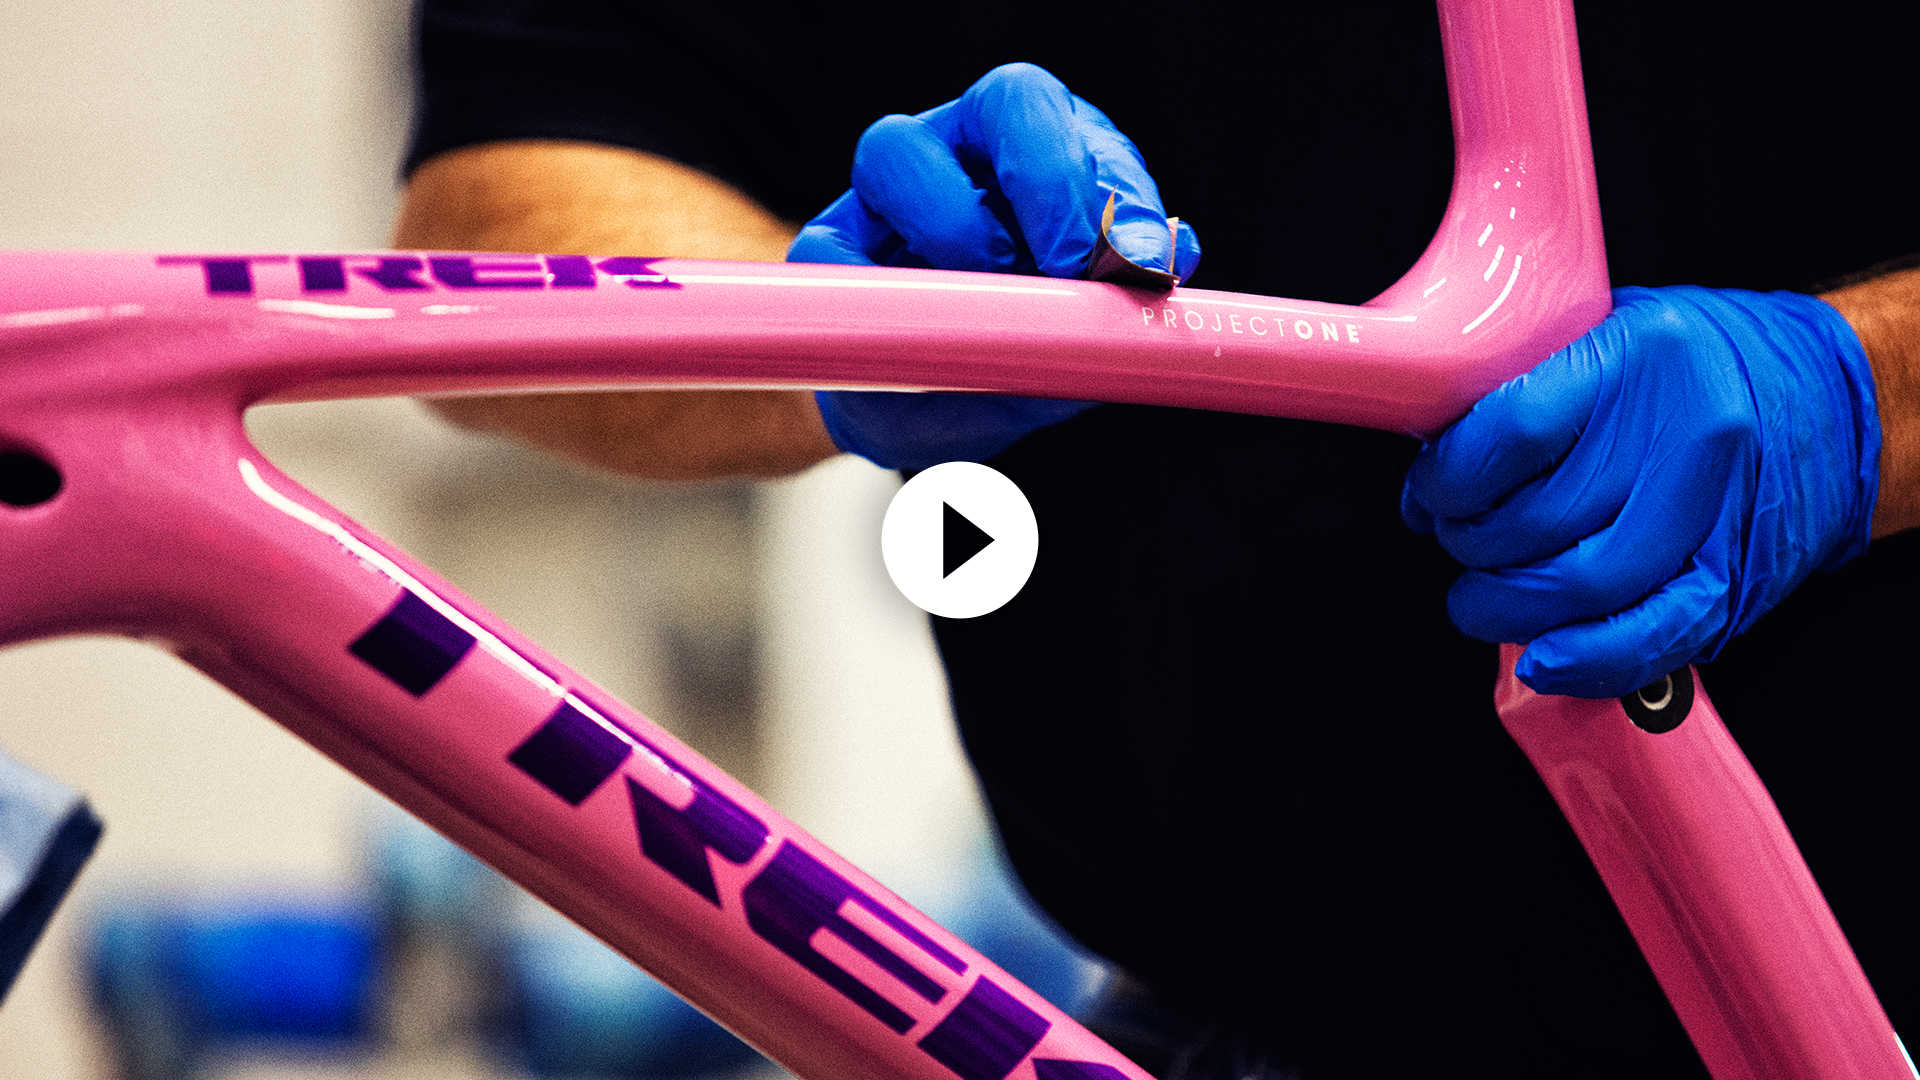 Project One: Customize Your Trek